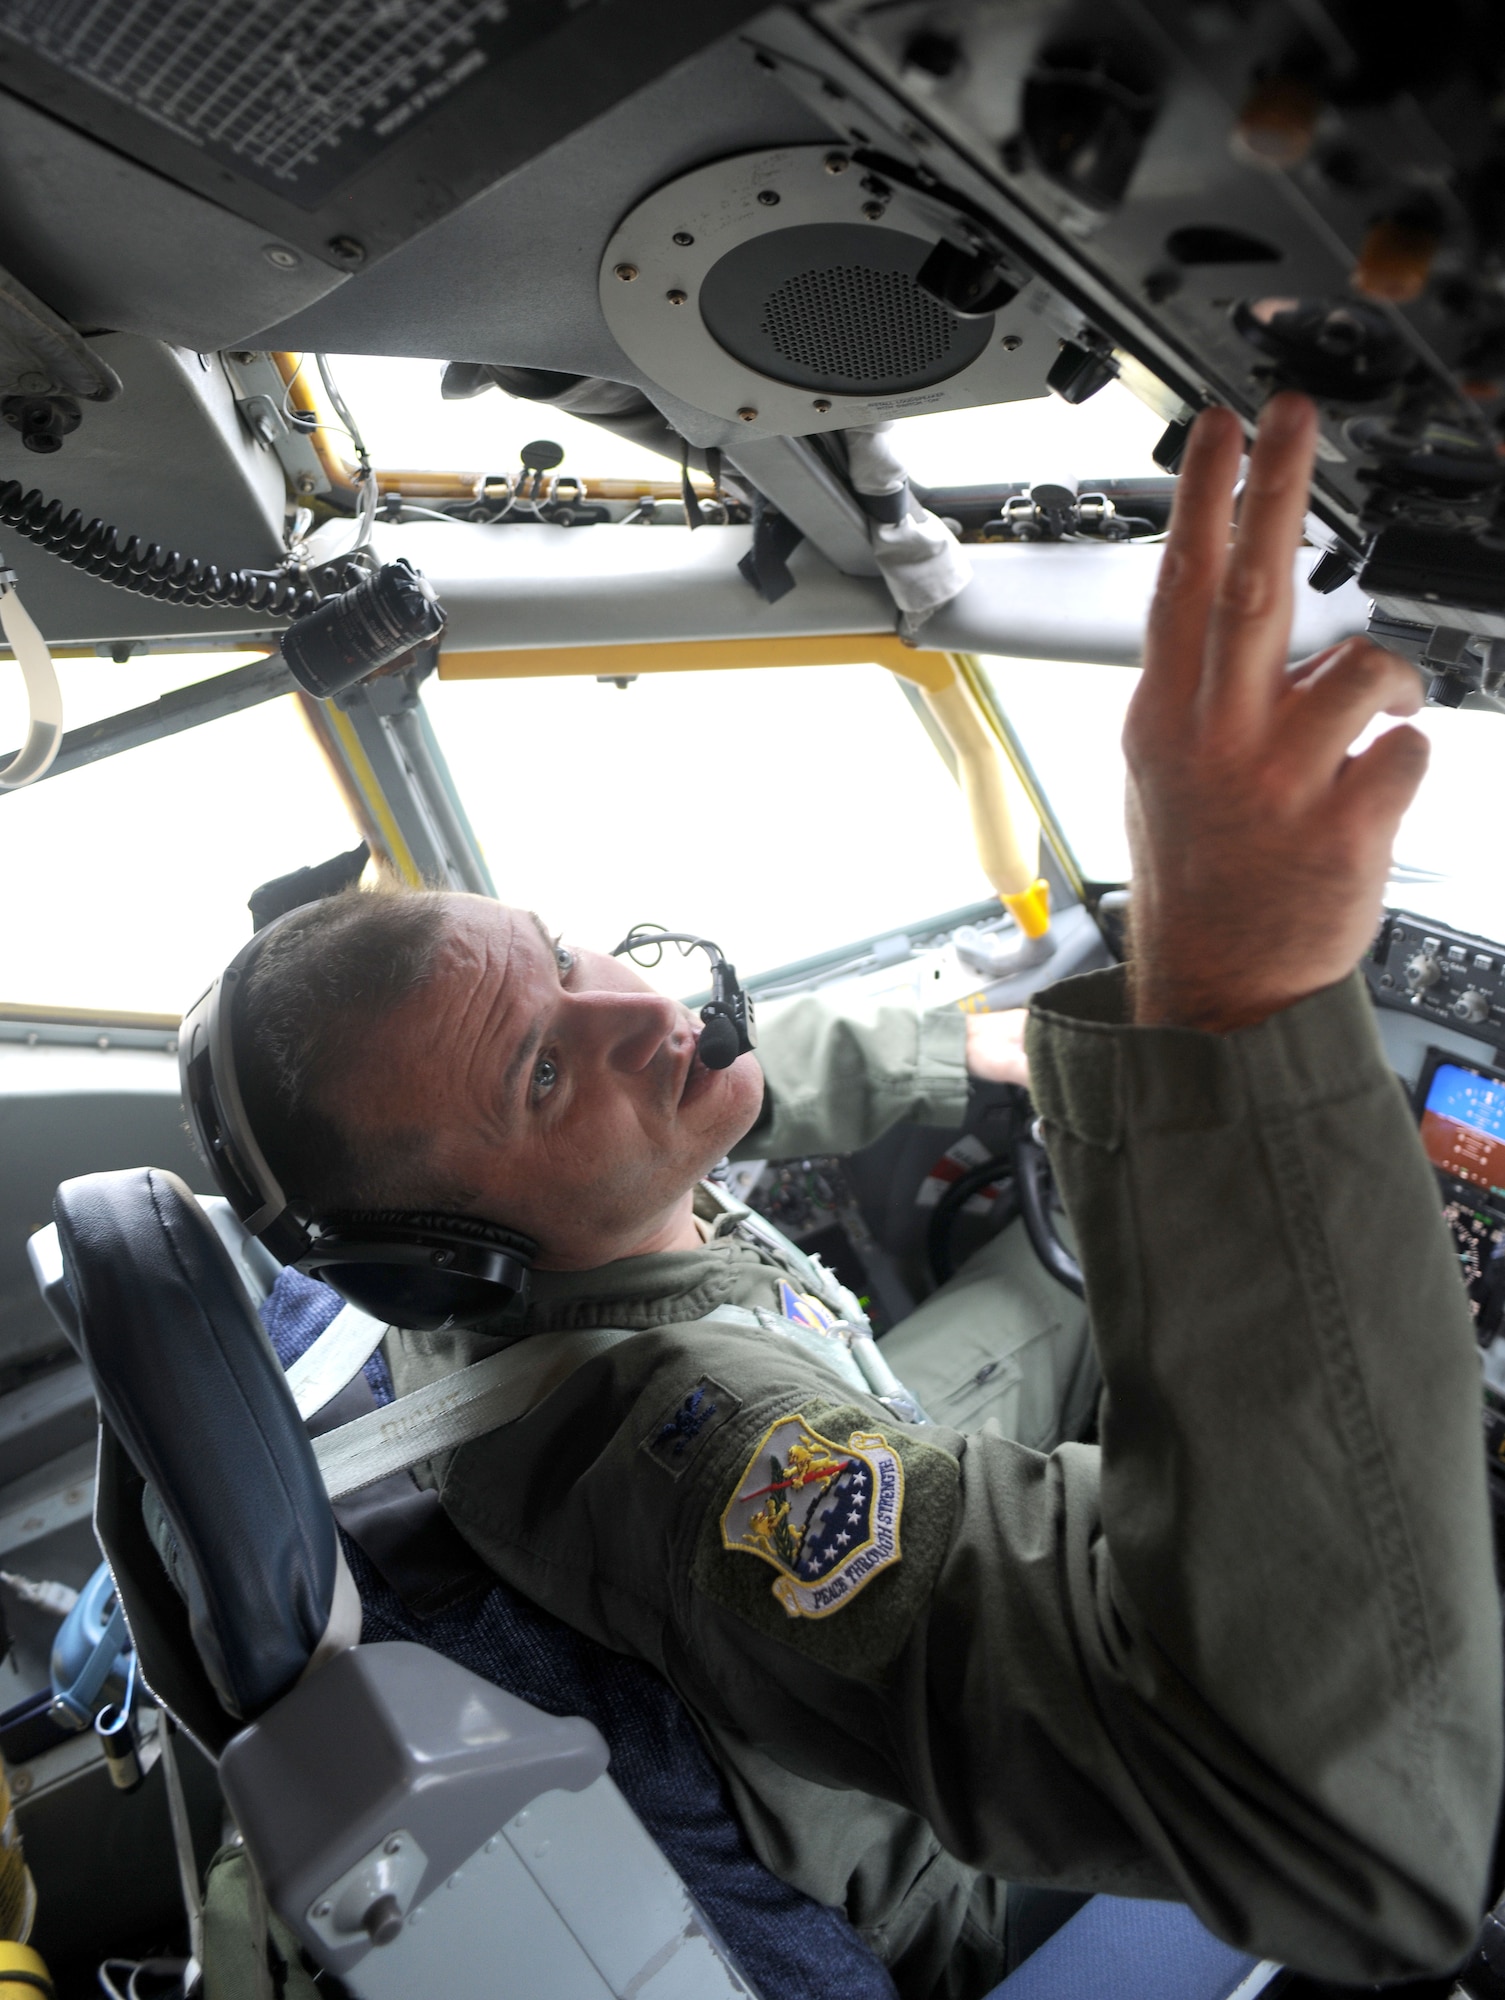 U.S. Air Force Col. Kenneth T. Bibb, Jr., 100th Air Refueling Wing commander and KC-135 Stratotanker pilot, performs a preflight inspection before a flight to Moron Air Base, Spain, Aug. 26, 2014, on RAF Mildenhall, England. Bibb is qualified as a command pilot with more than 4,500 flight hours and tries to fly whenever his schedule as a wing commander allows. (U.S. Air Force photo/Senior Airman Kate Maurer/Released)